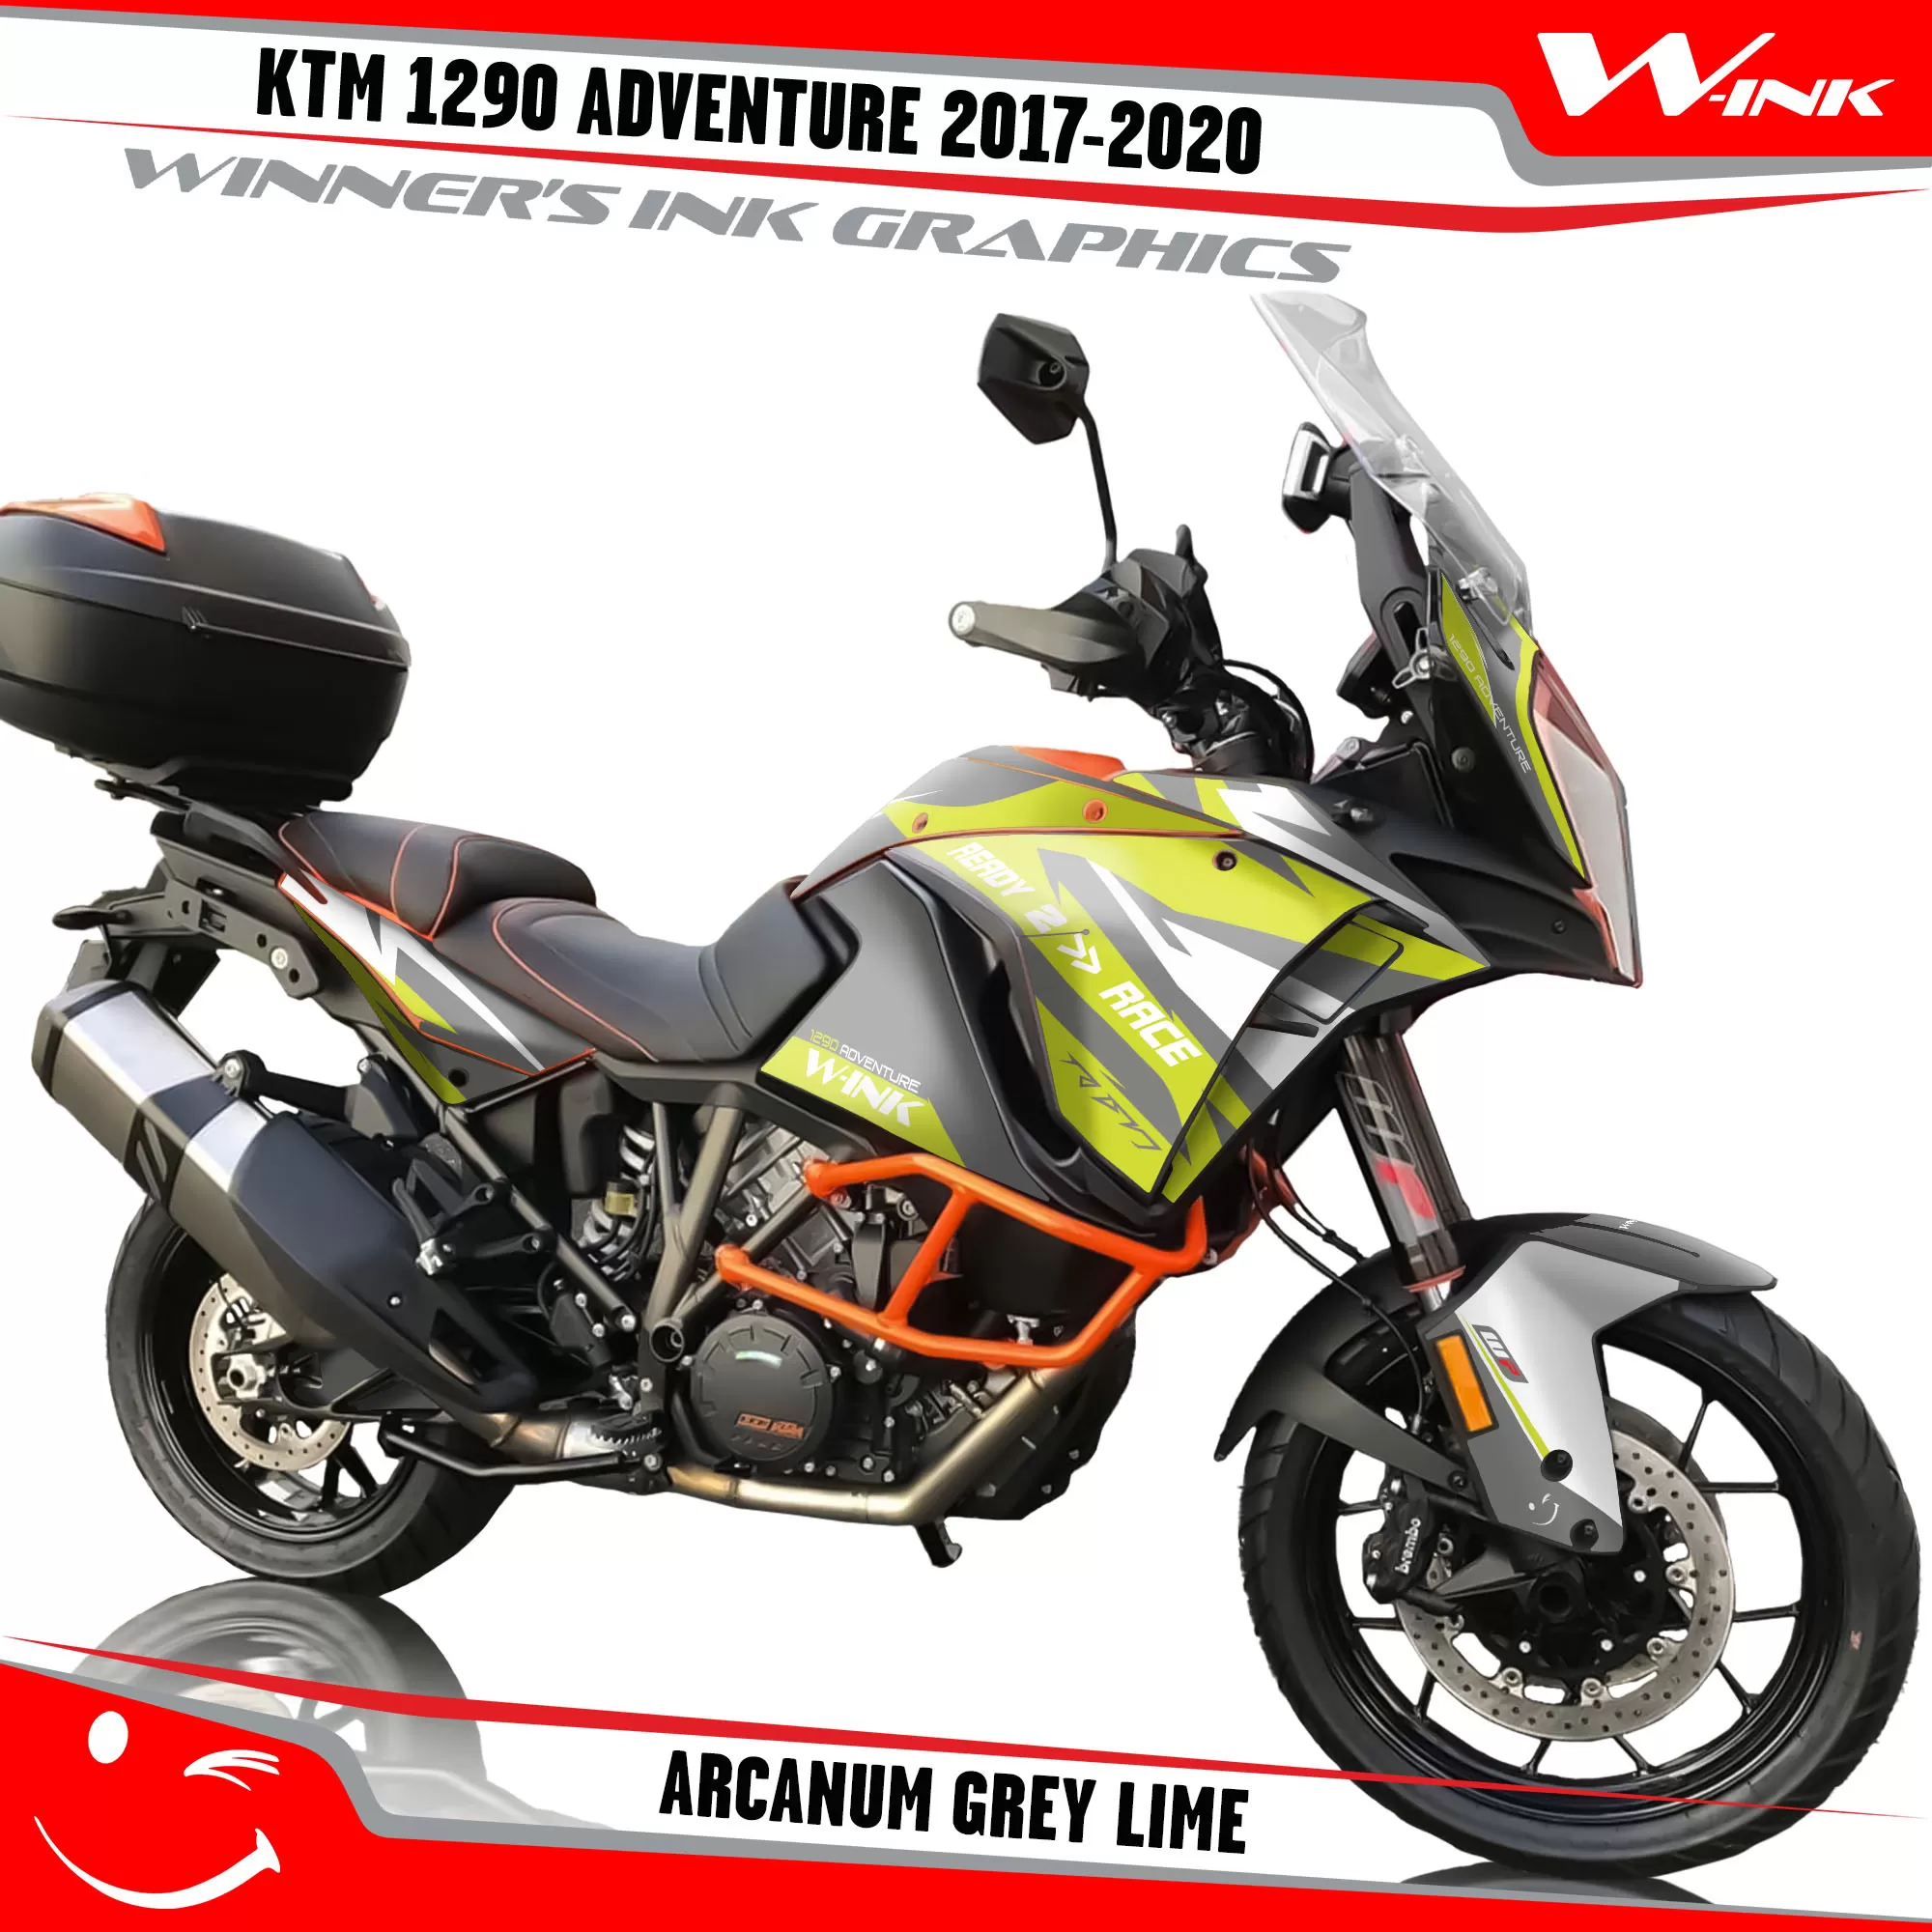 KTM-Adventure-1290-2017-2018-2019-2020-graphics-kit-and-decals-Arcanum-Grey-Lime